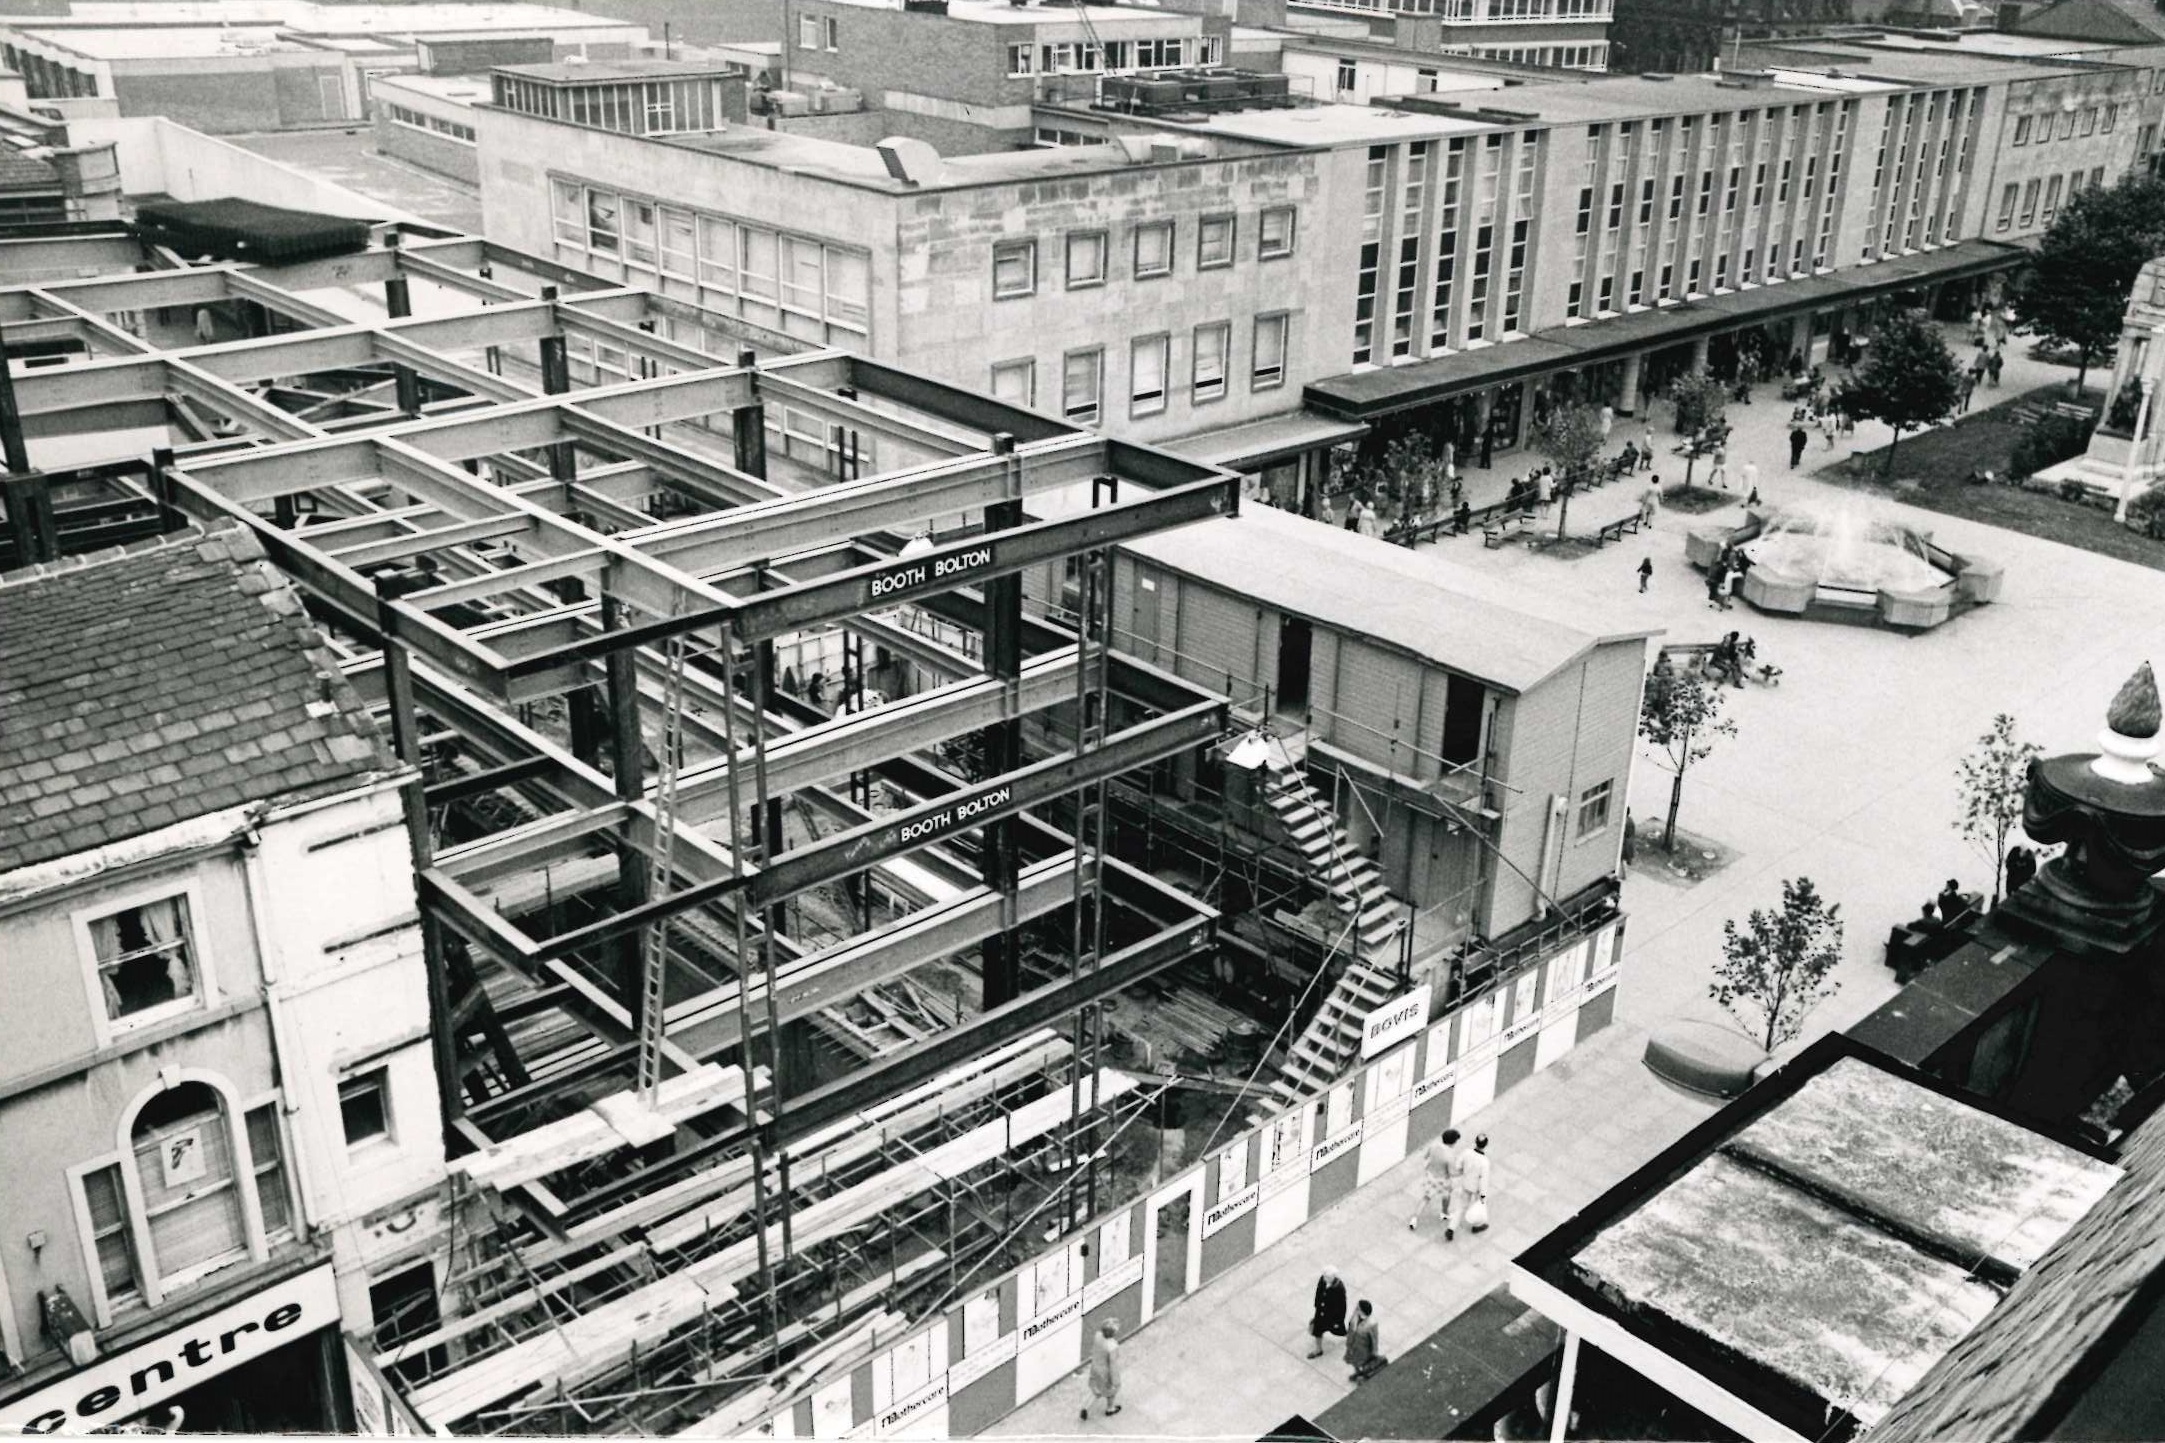 Looking back: Building in the town centre in 1973